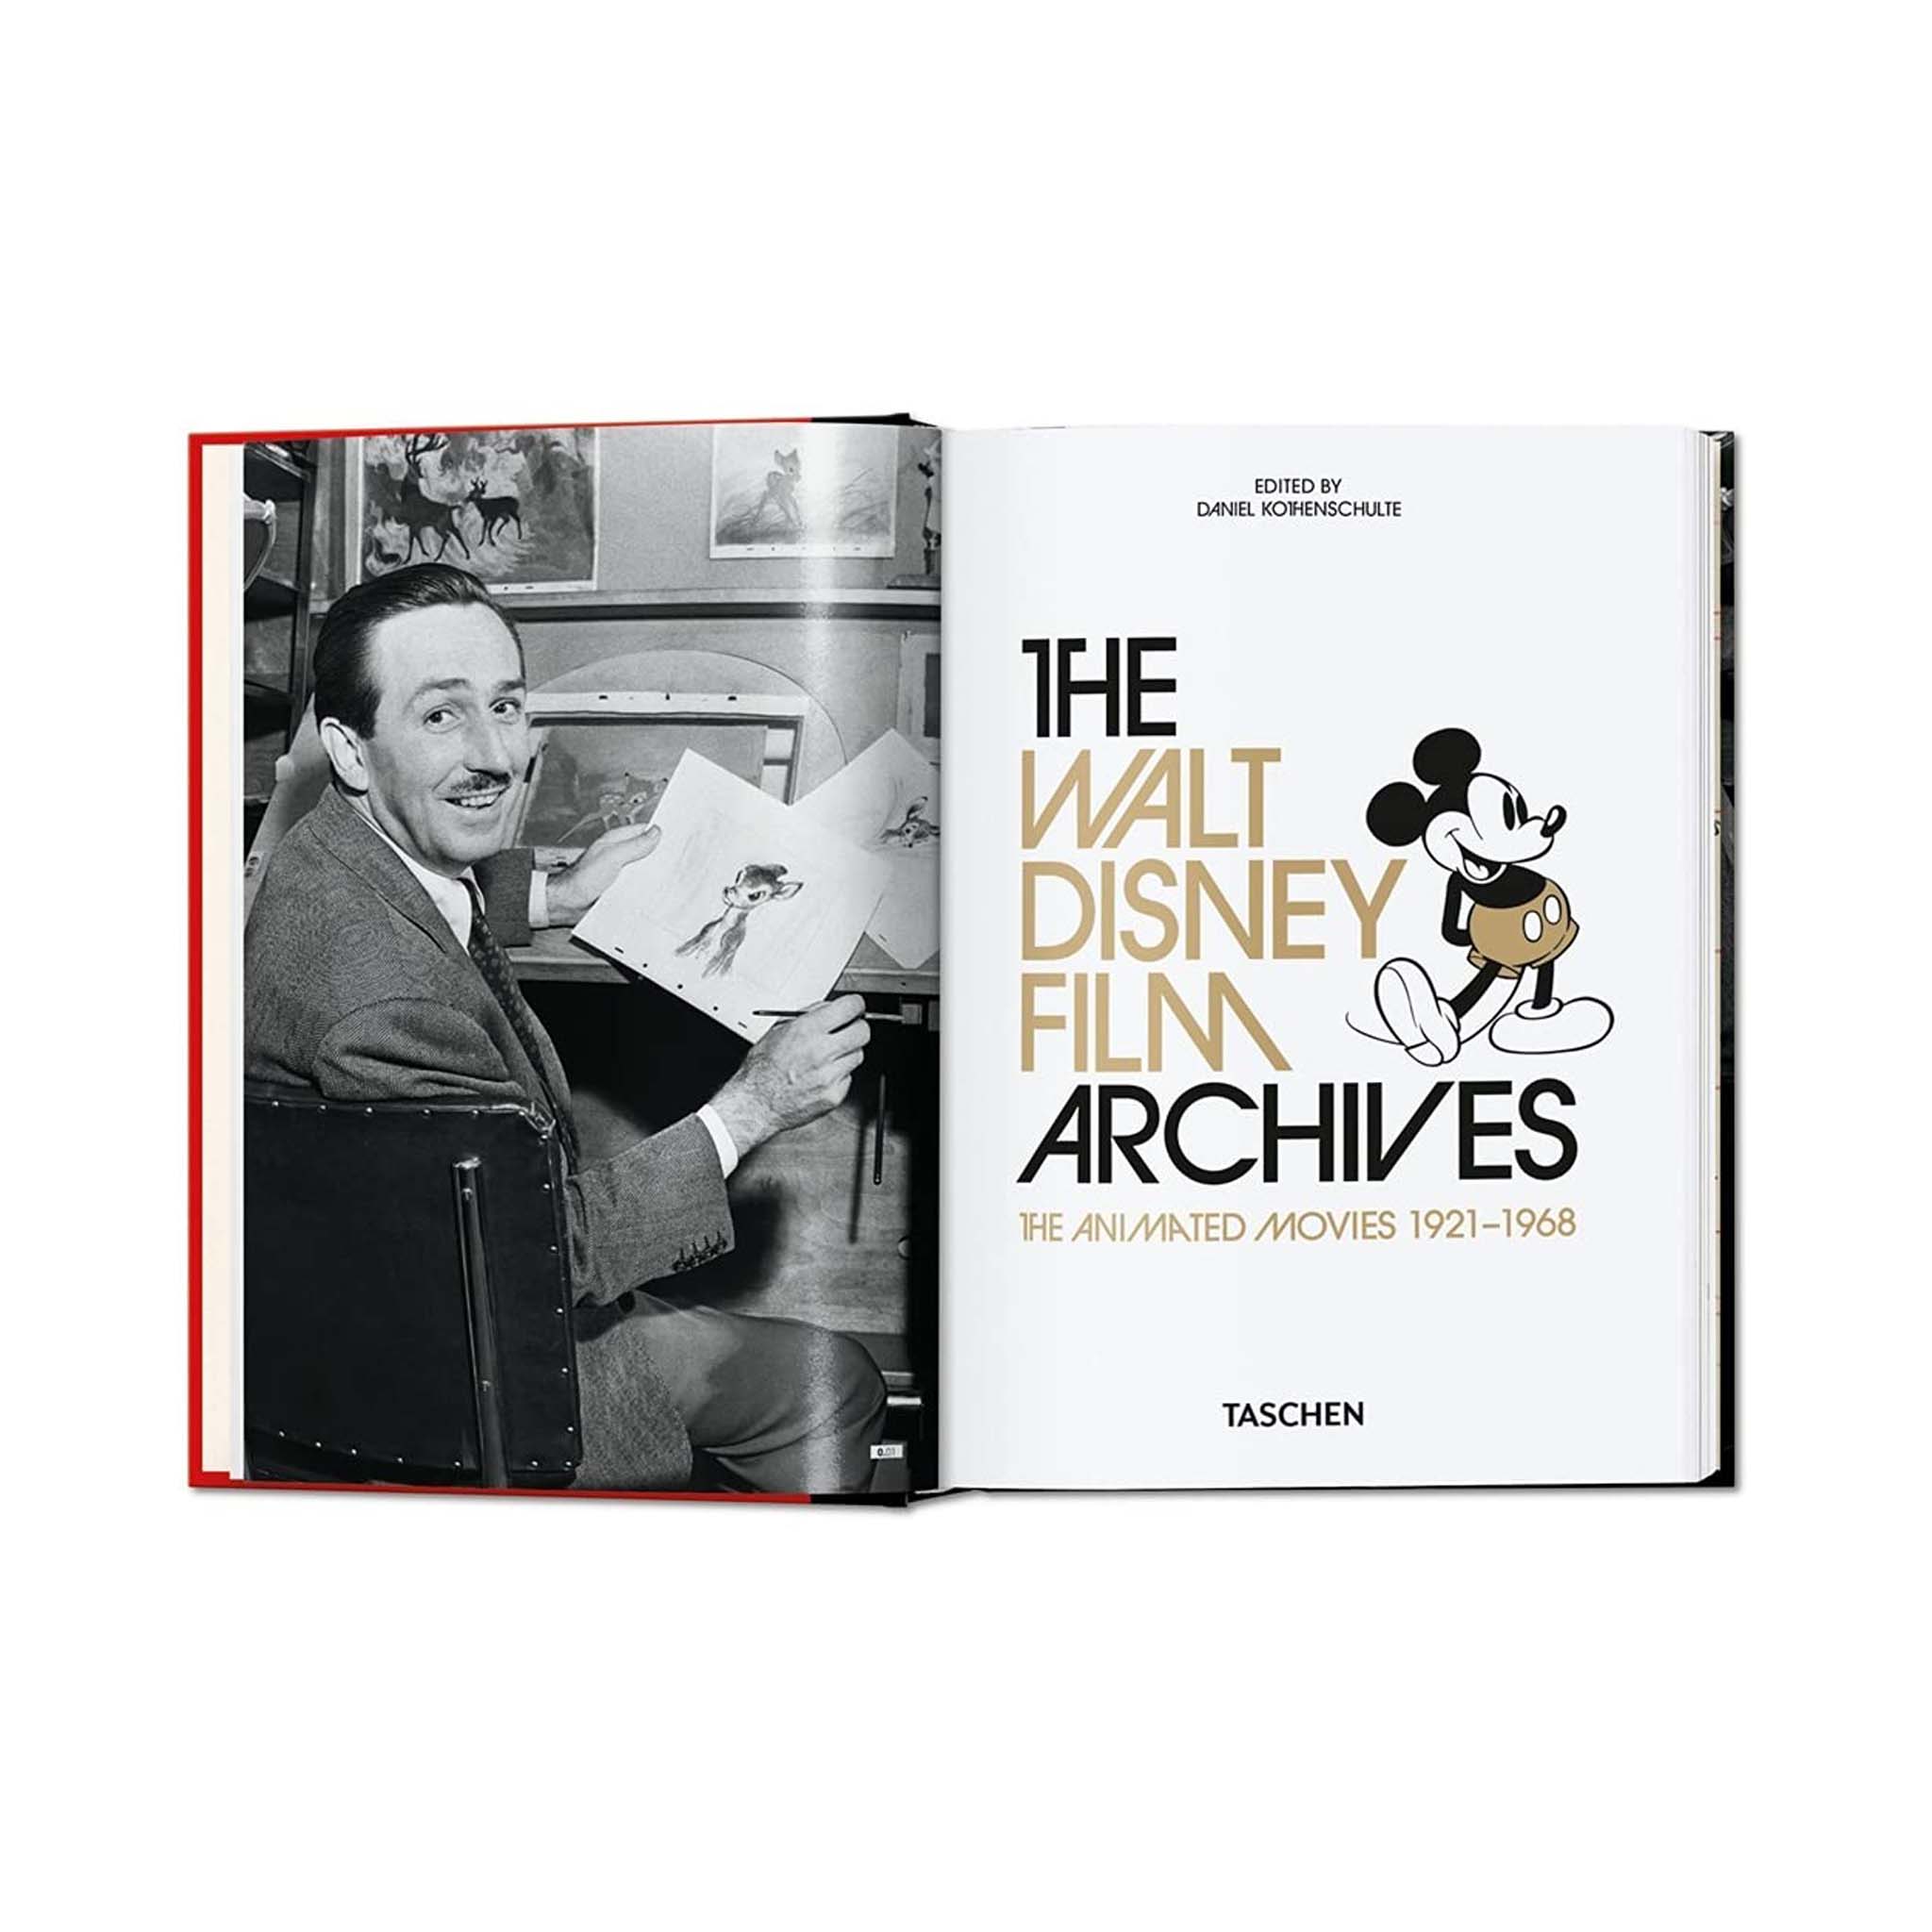 DISNEY ARCHIVES, MOVIES 1